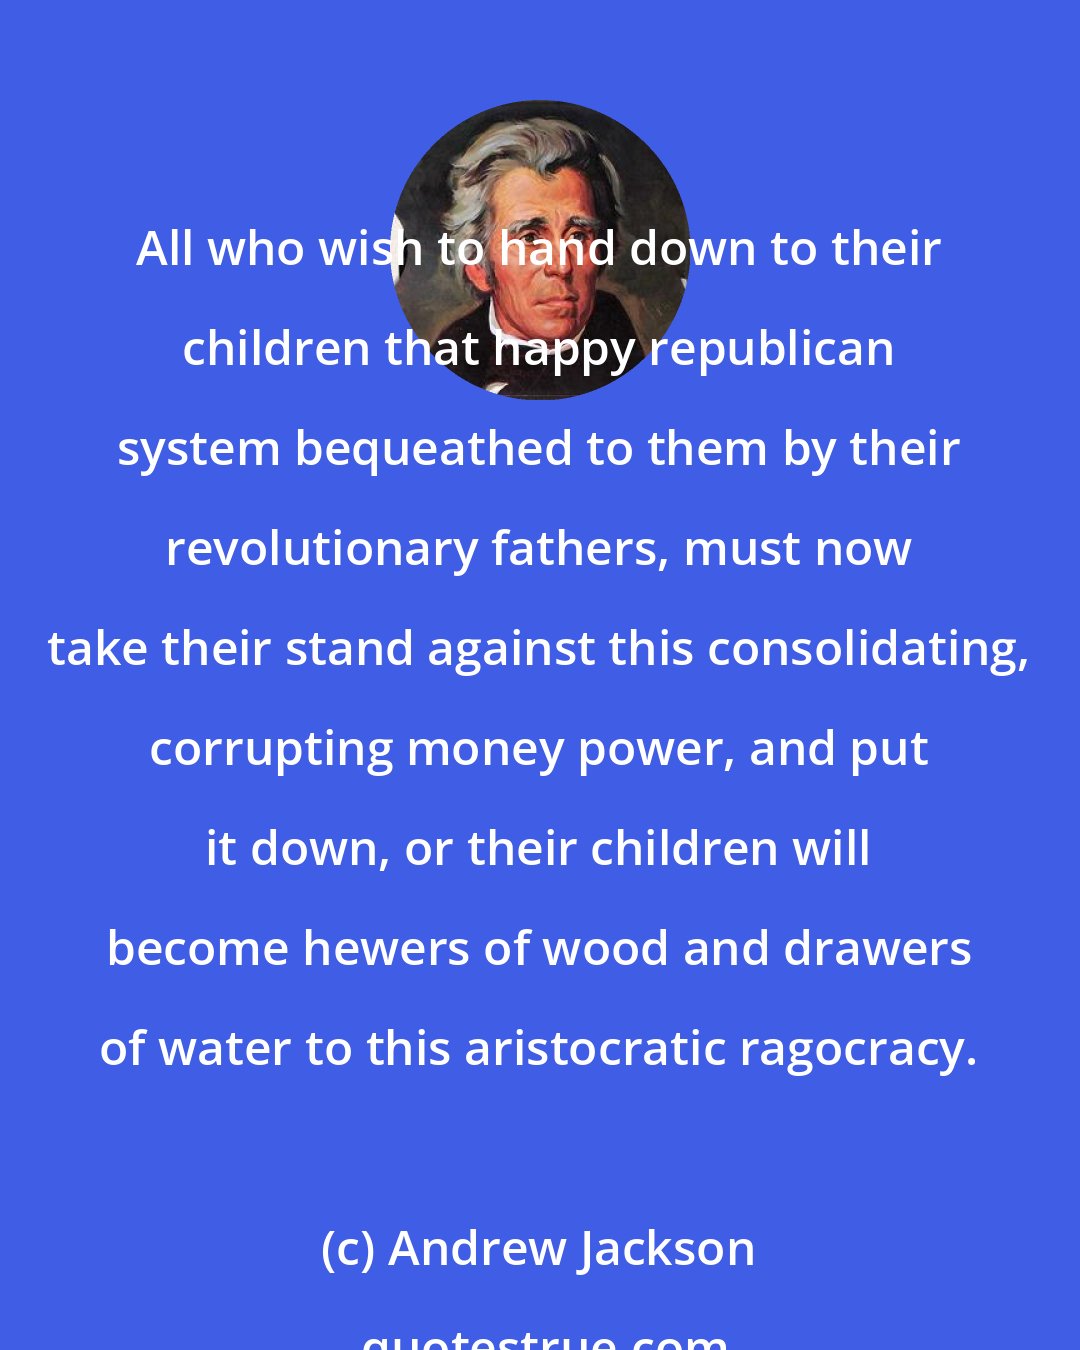 Andrew Jackson: All who wish to hand down to their children that happy republican system bequeathed to them by their revolutionary fathers, must now take their stand against this consolidating, corrupting money power, and put it down, or their children will become hewers of wood and drawers of water to this aristocratic ragocracy.